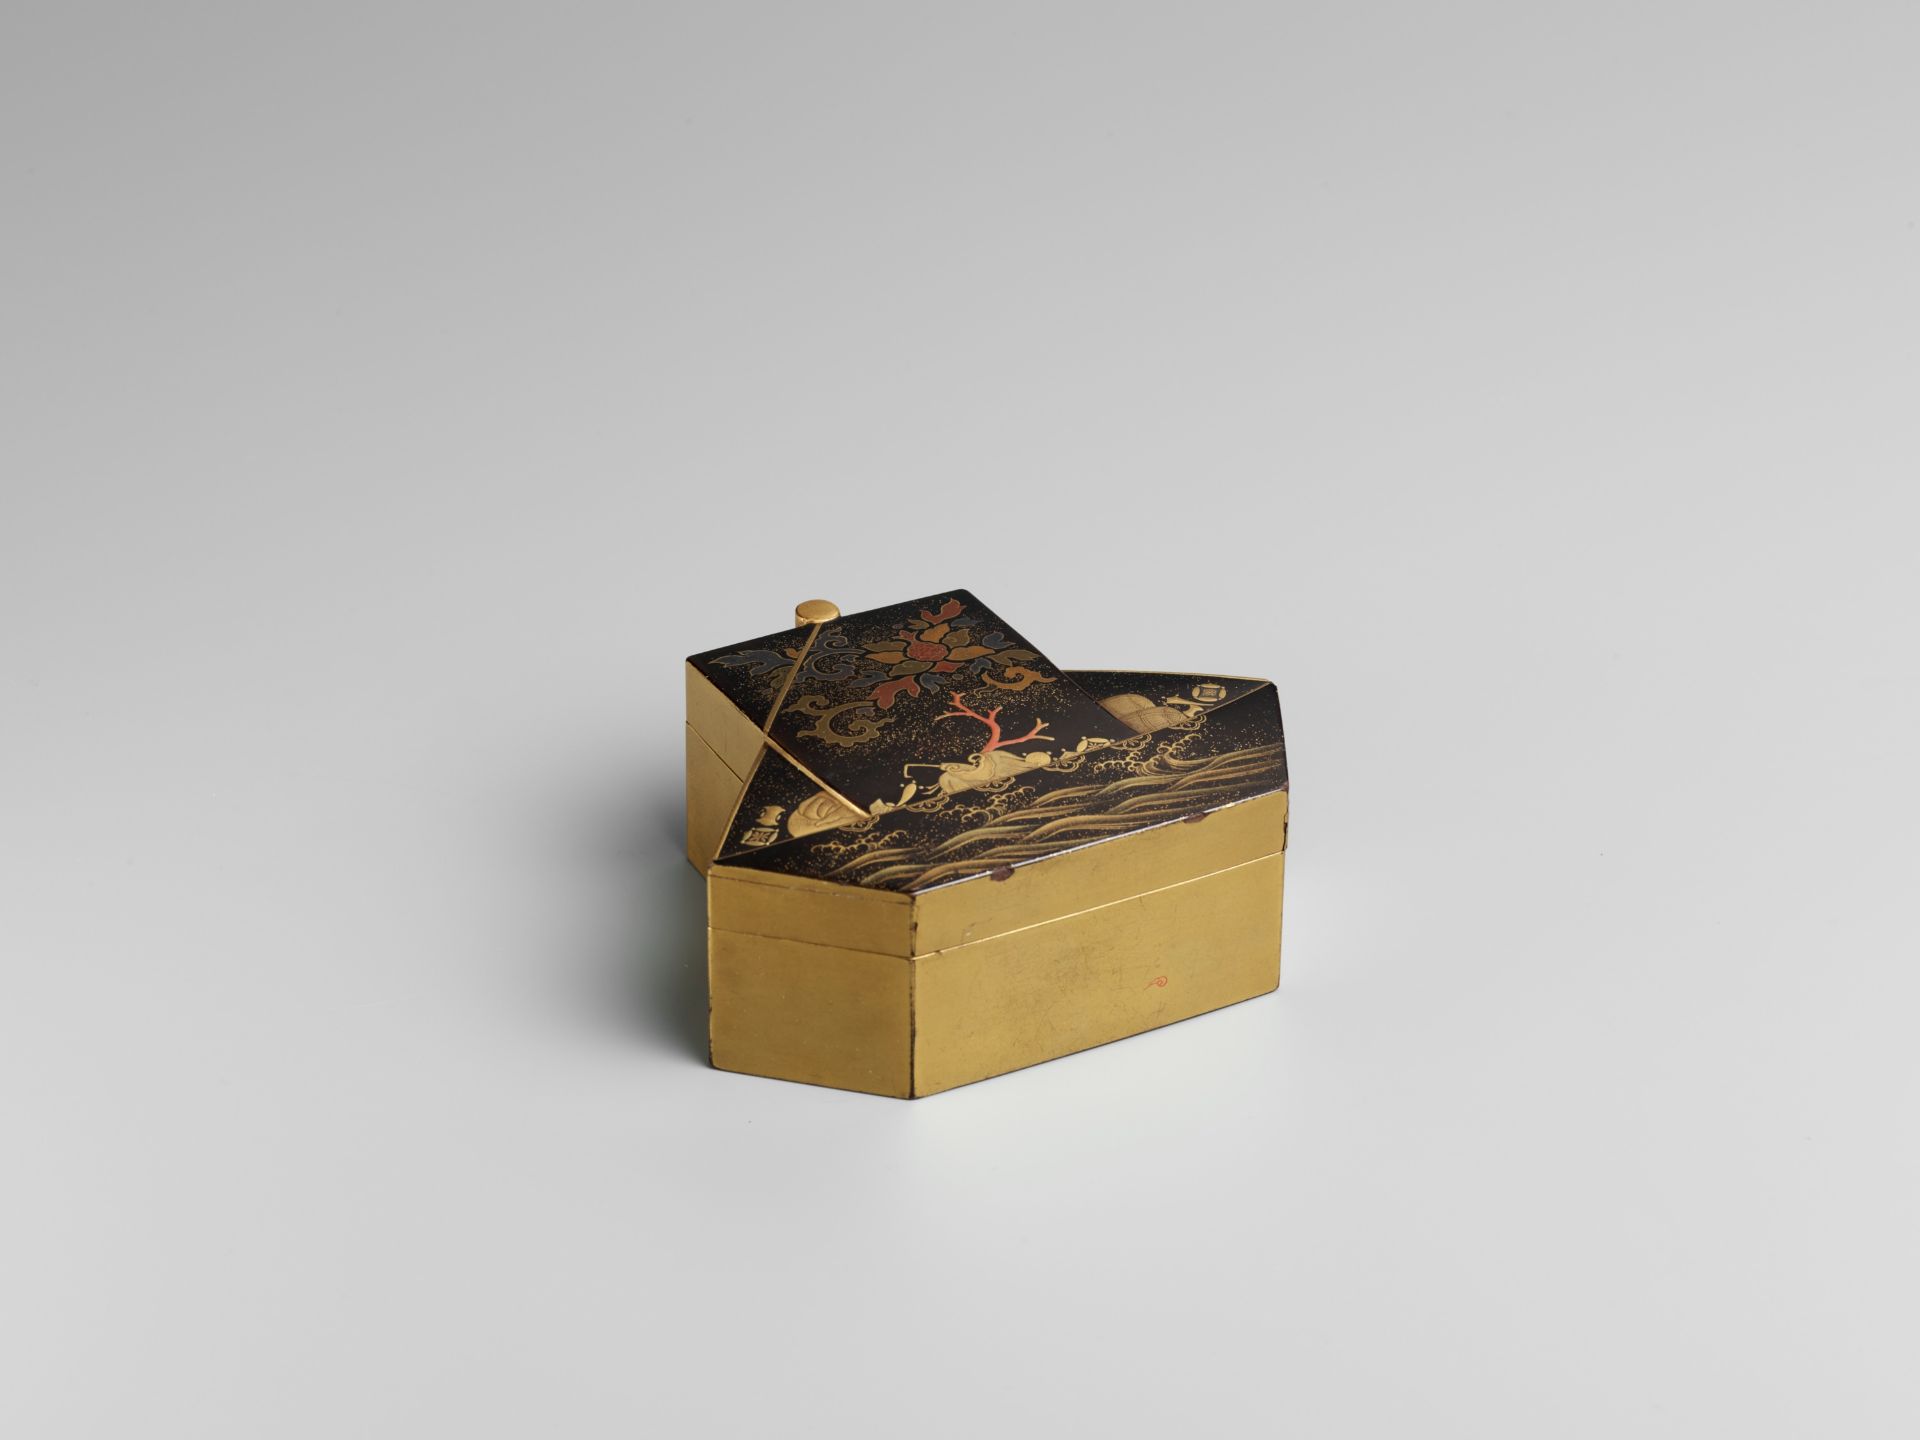 SATO: A RARE BLACK AND GOLD LACQUER KOBAKO AND COVER IN THE FORM OF THE TAKARABUNE (TREASURE SHIP) - Image 8 of 12